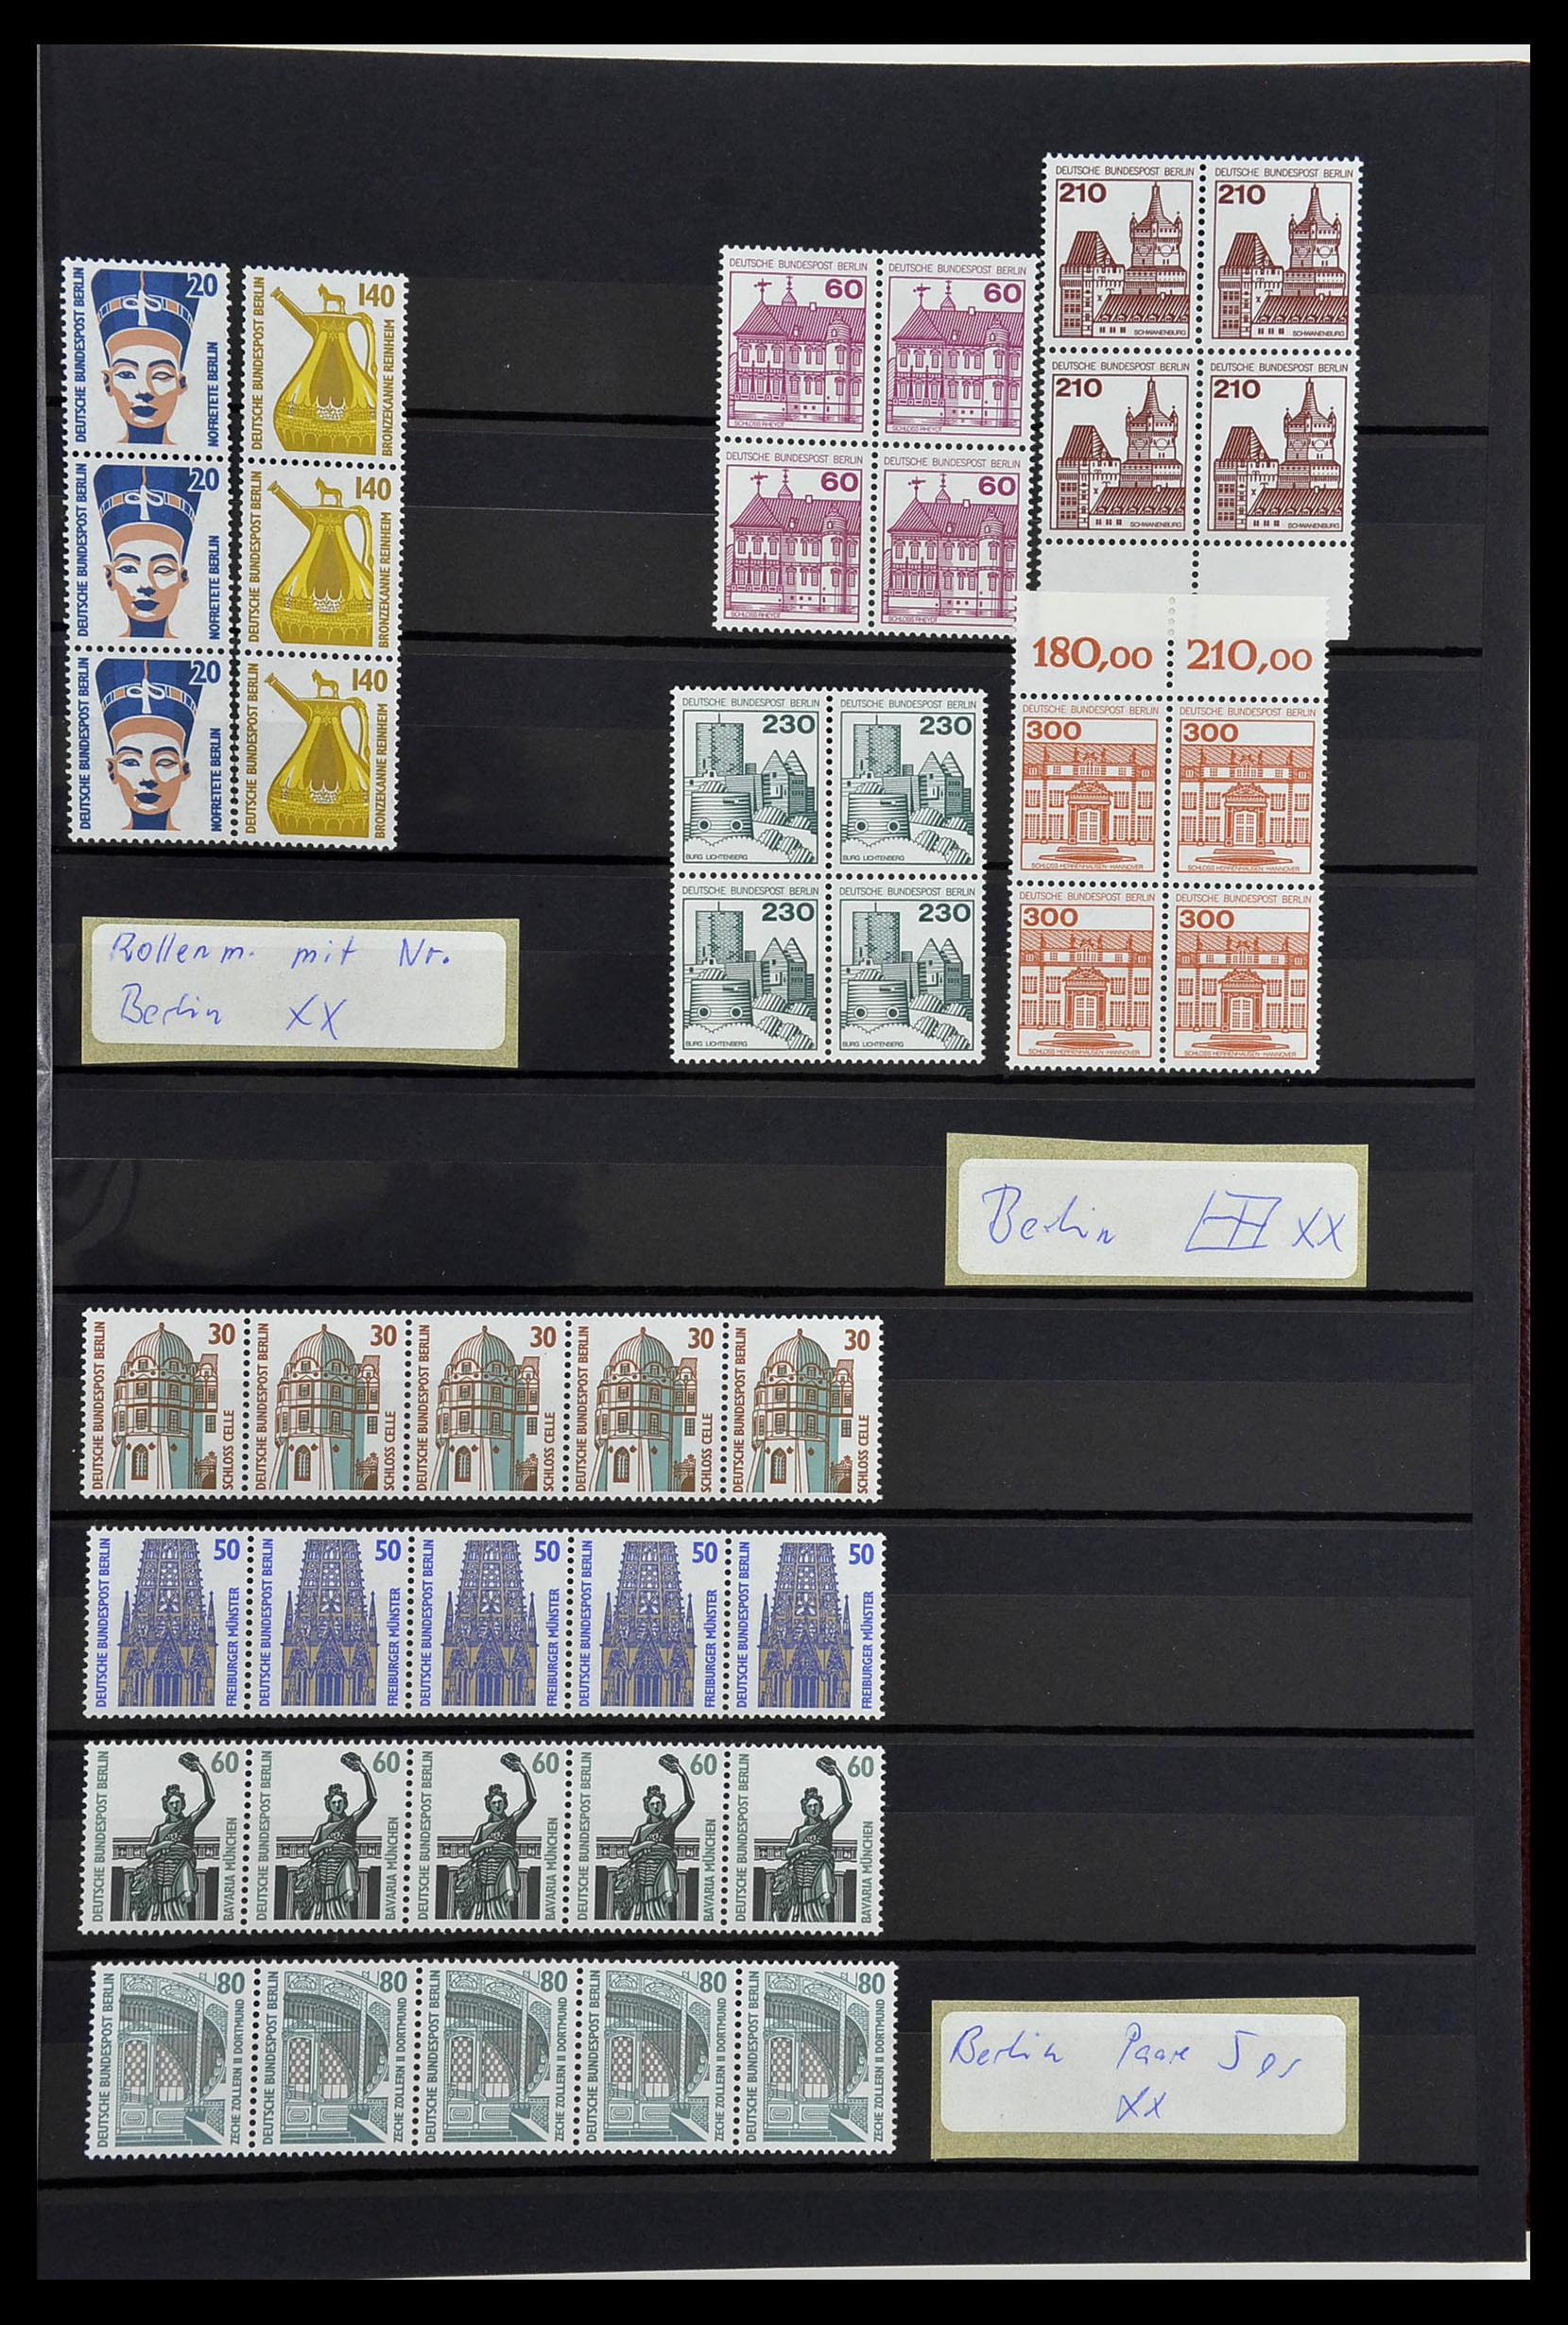 34003 049 - Stamp collection 34003 Bundespost combinations 1950-2020.